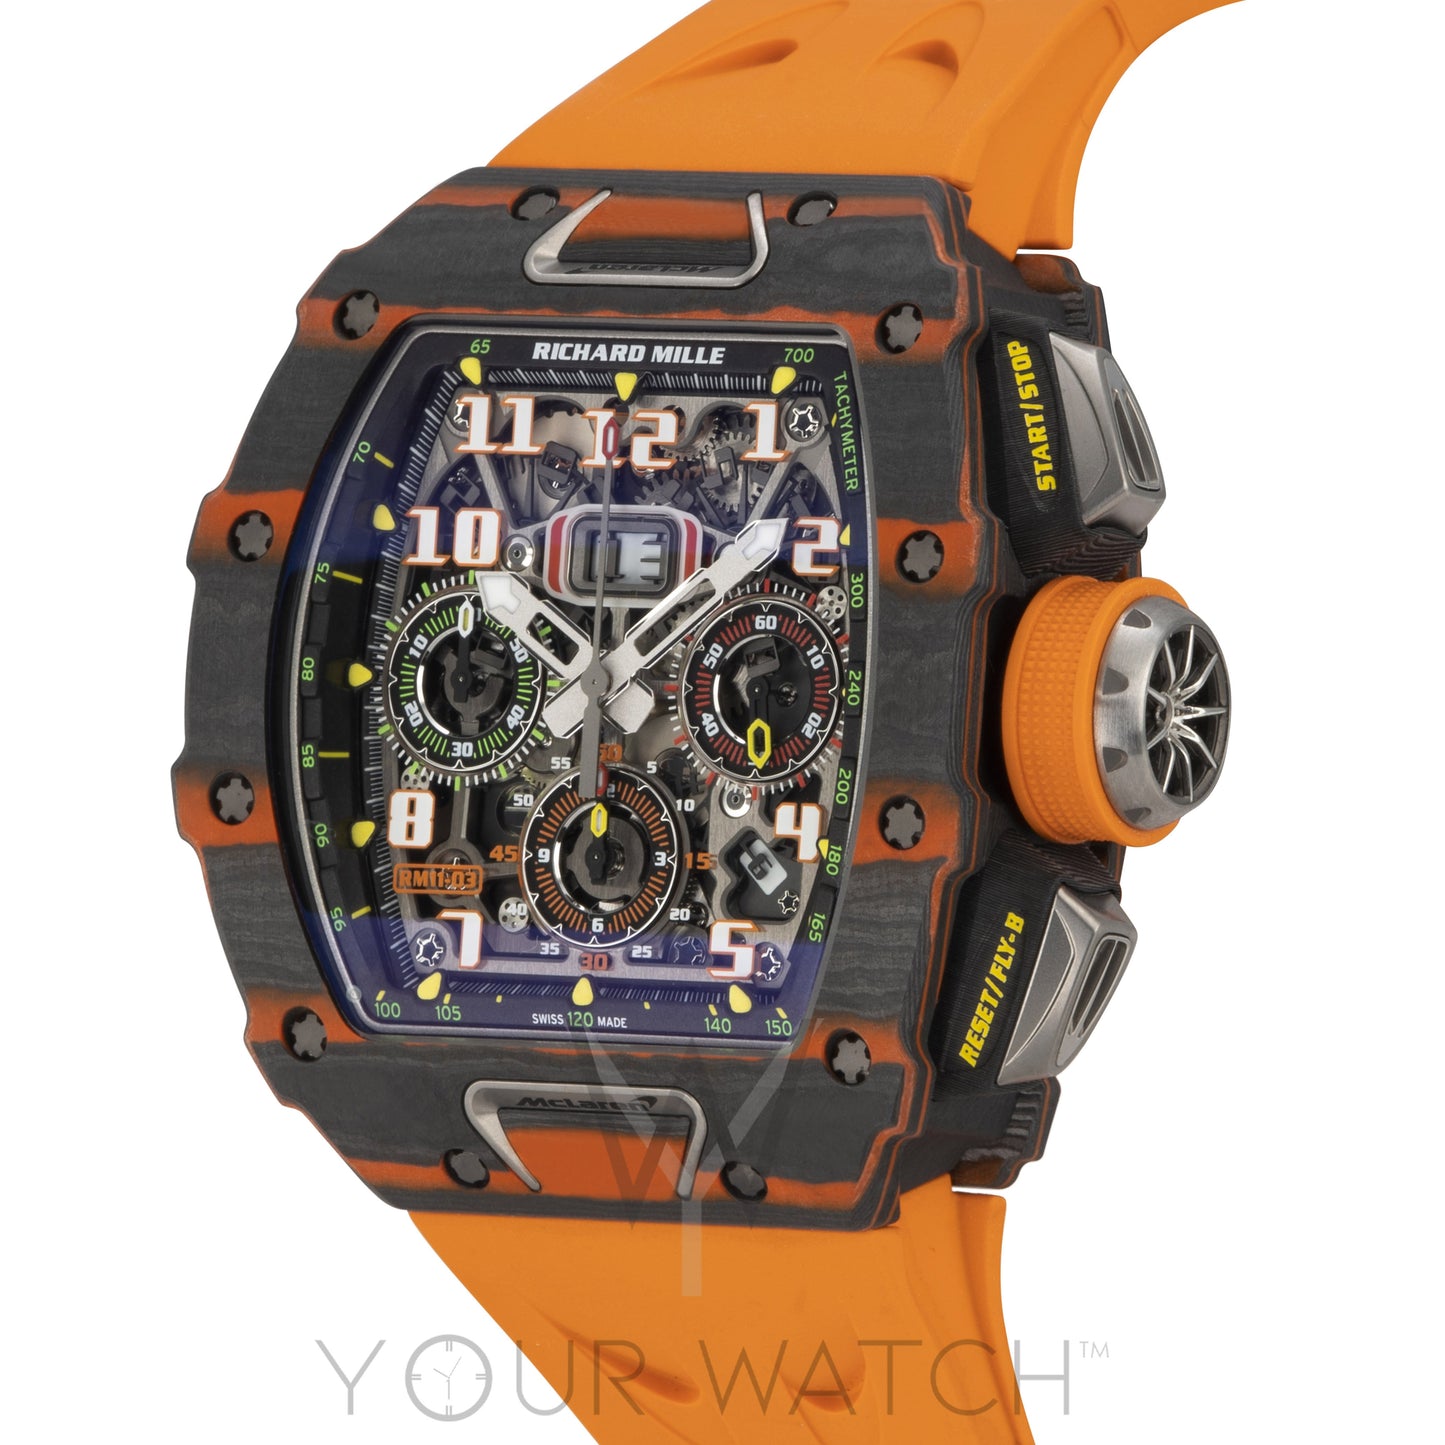 RM 11-03 Automatic Flyback Chronograph McLaren